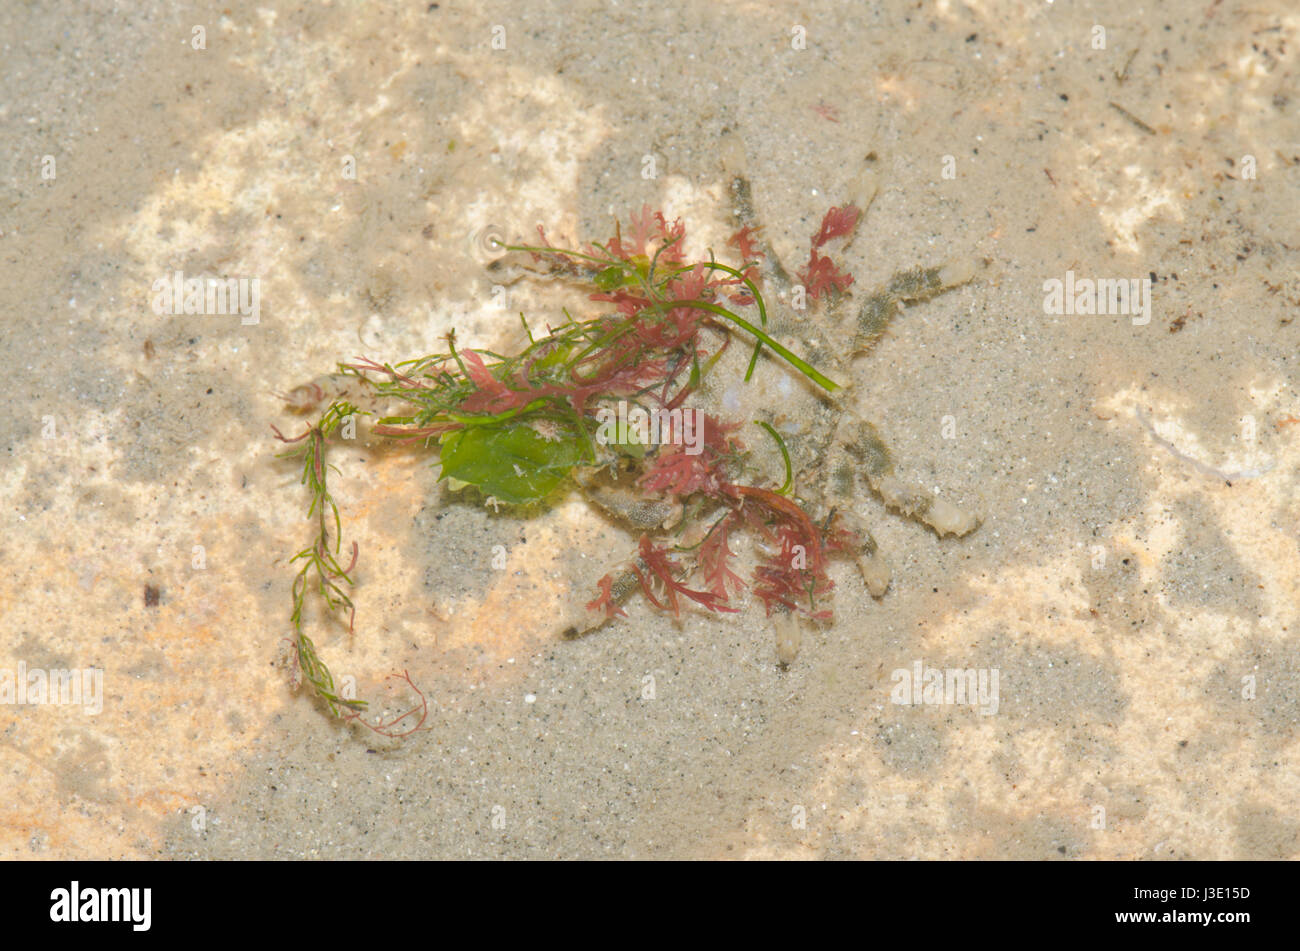 Camouflaged Spider Crab decorated with algae 2 of 2 Stock Photo